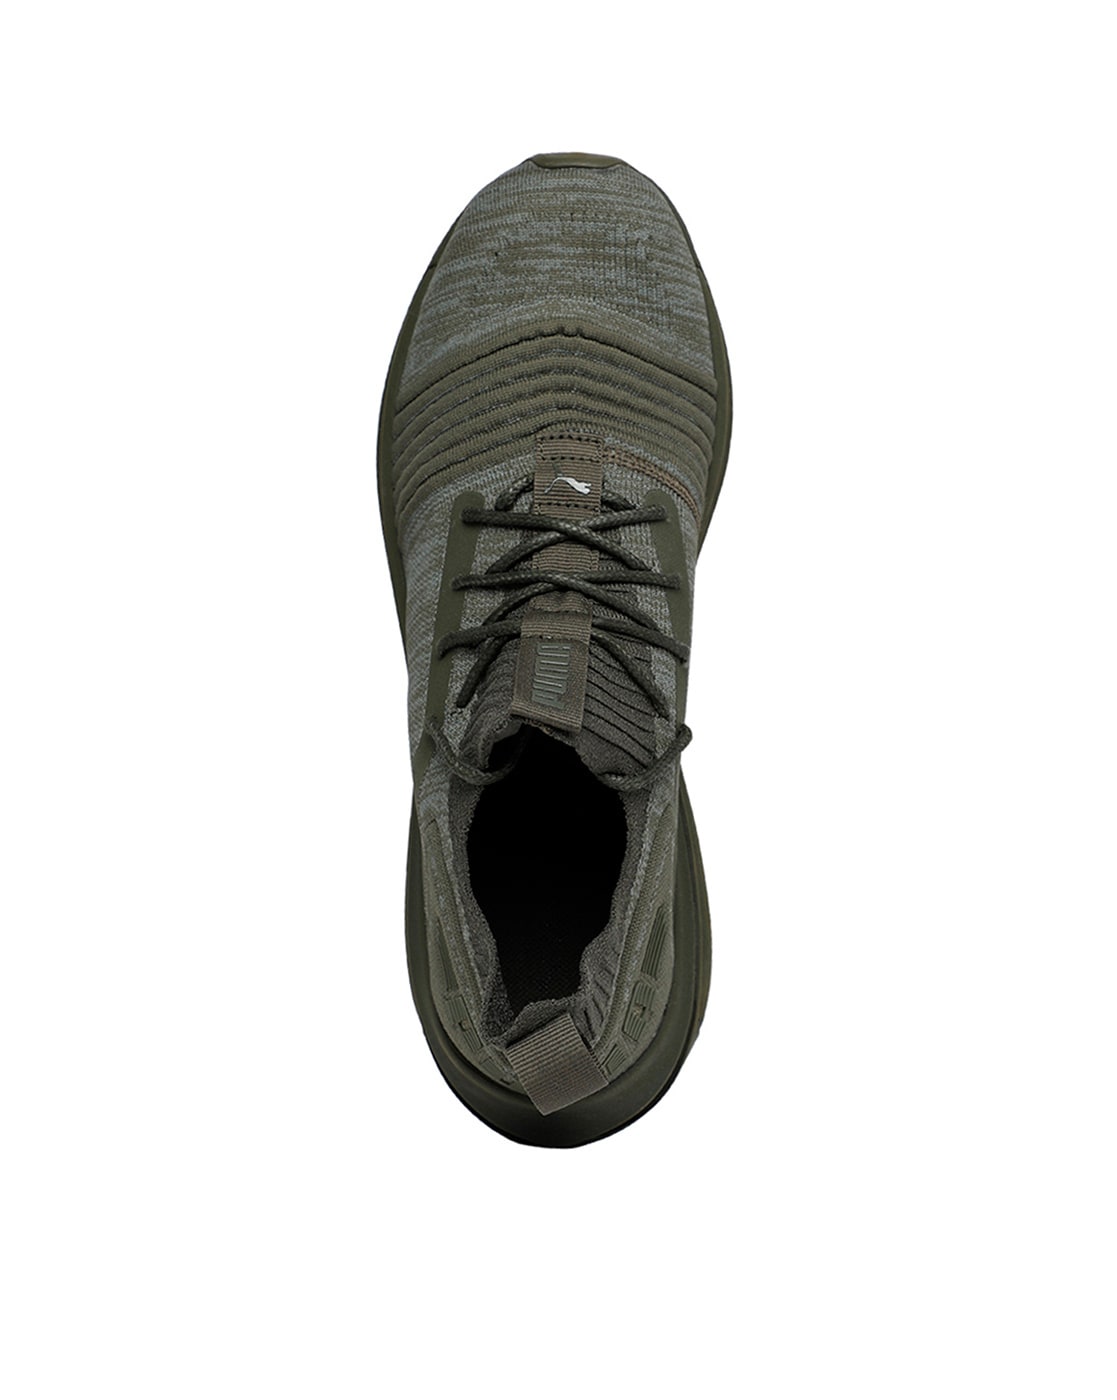 Buy Olive Green Sports Shoes for Men by 